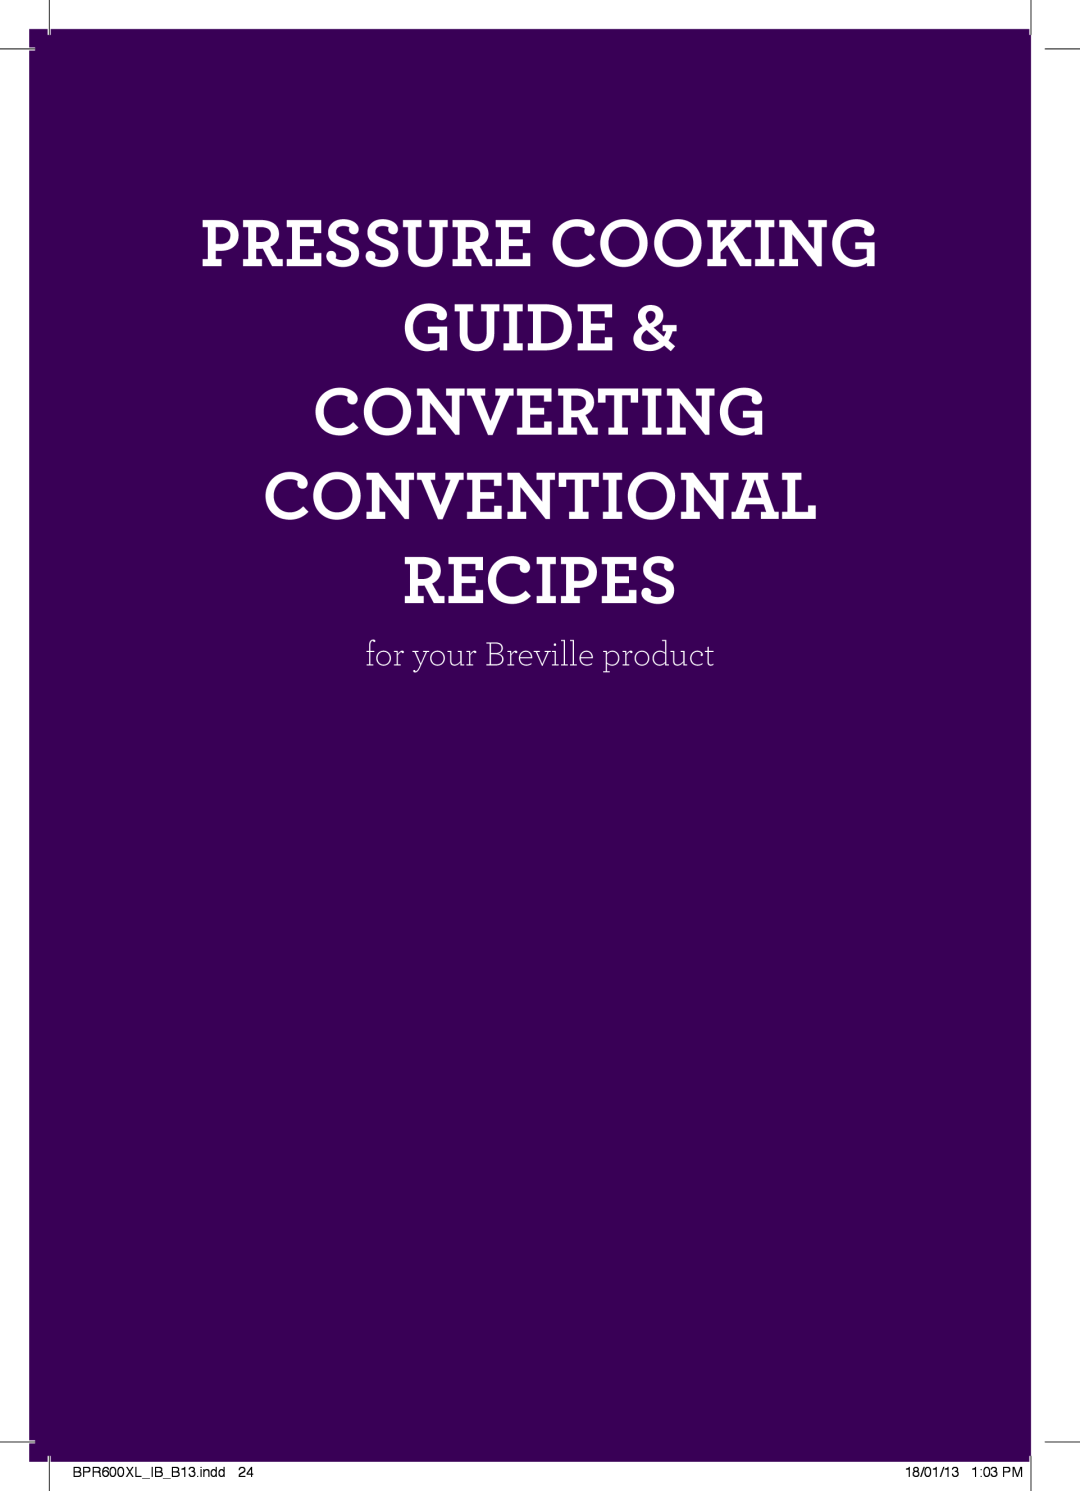 Breville manual Pressure Cooking Guide Converting Conventional Recipes, for your Breville product, BPR600XLIBB13.indd 